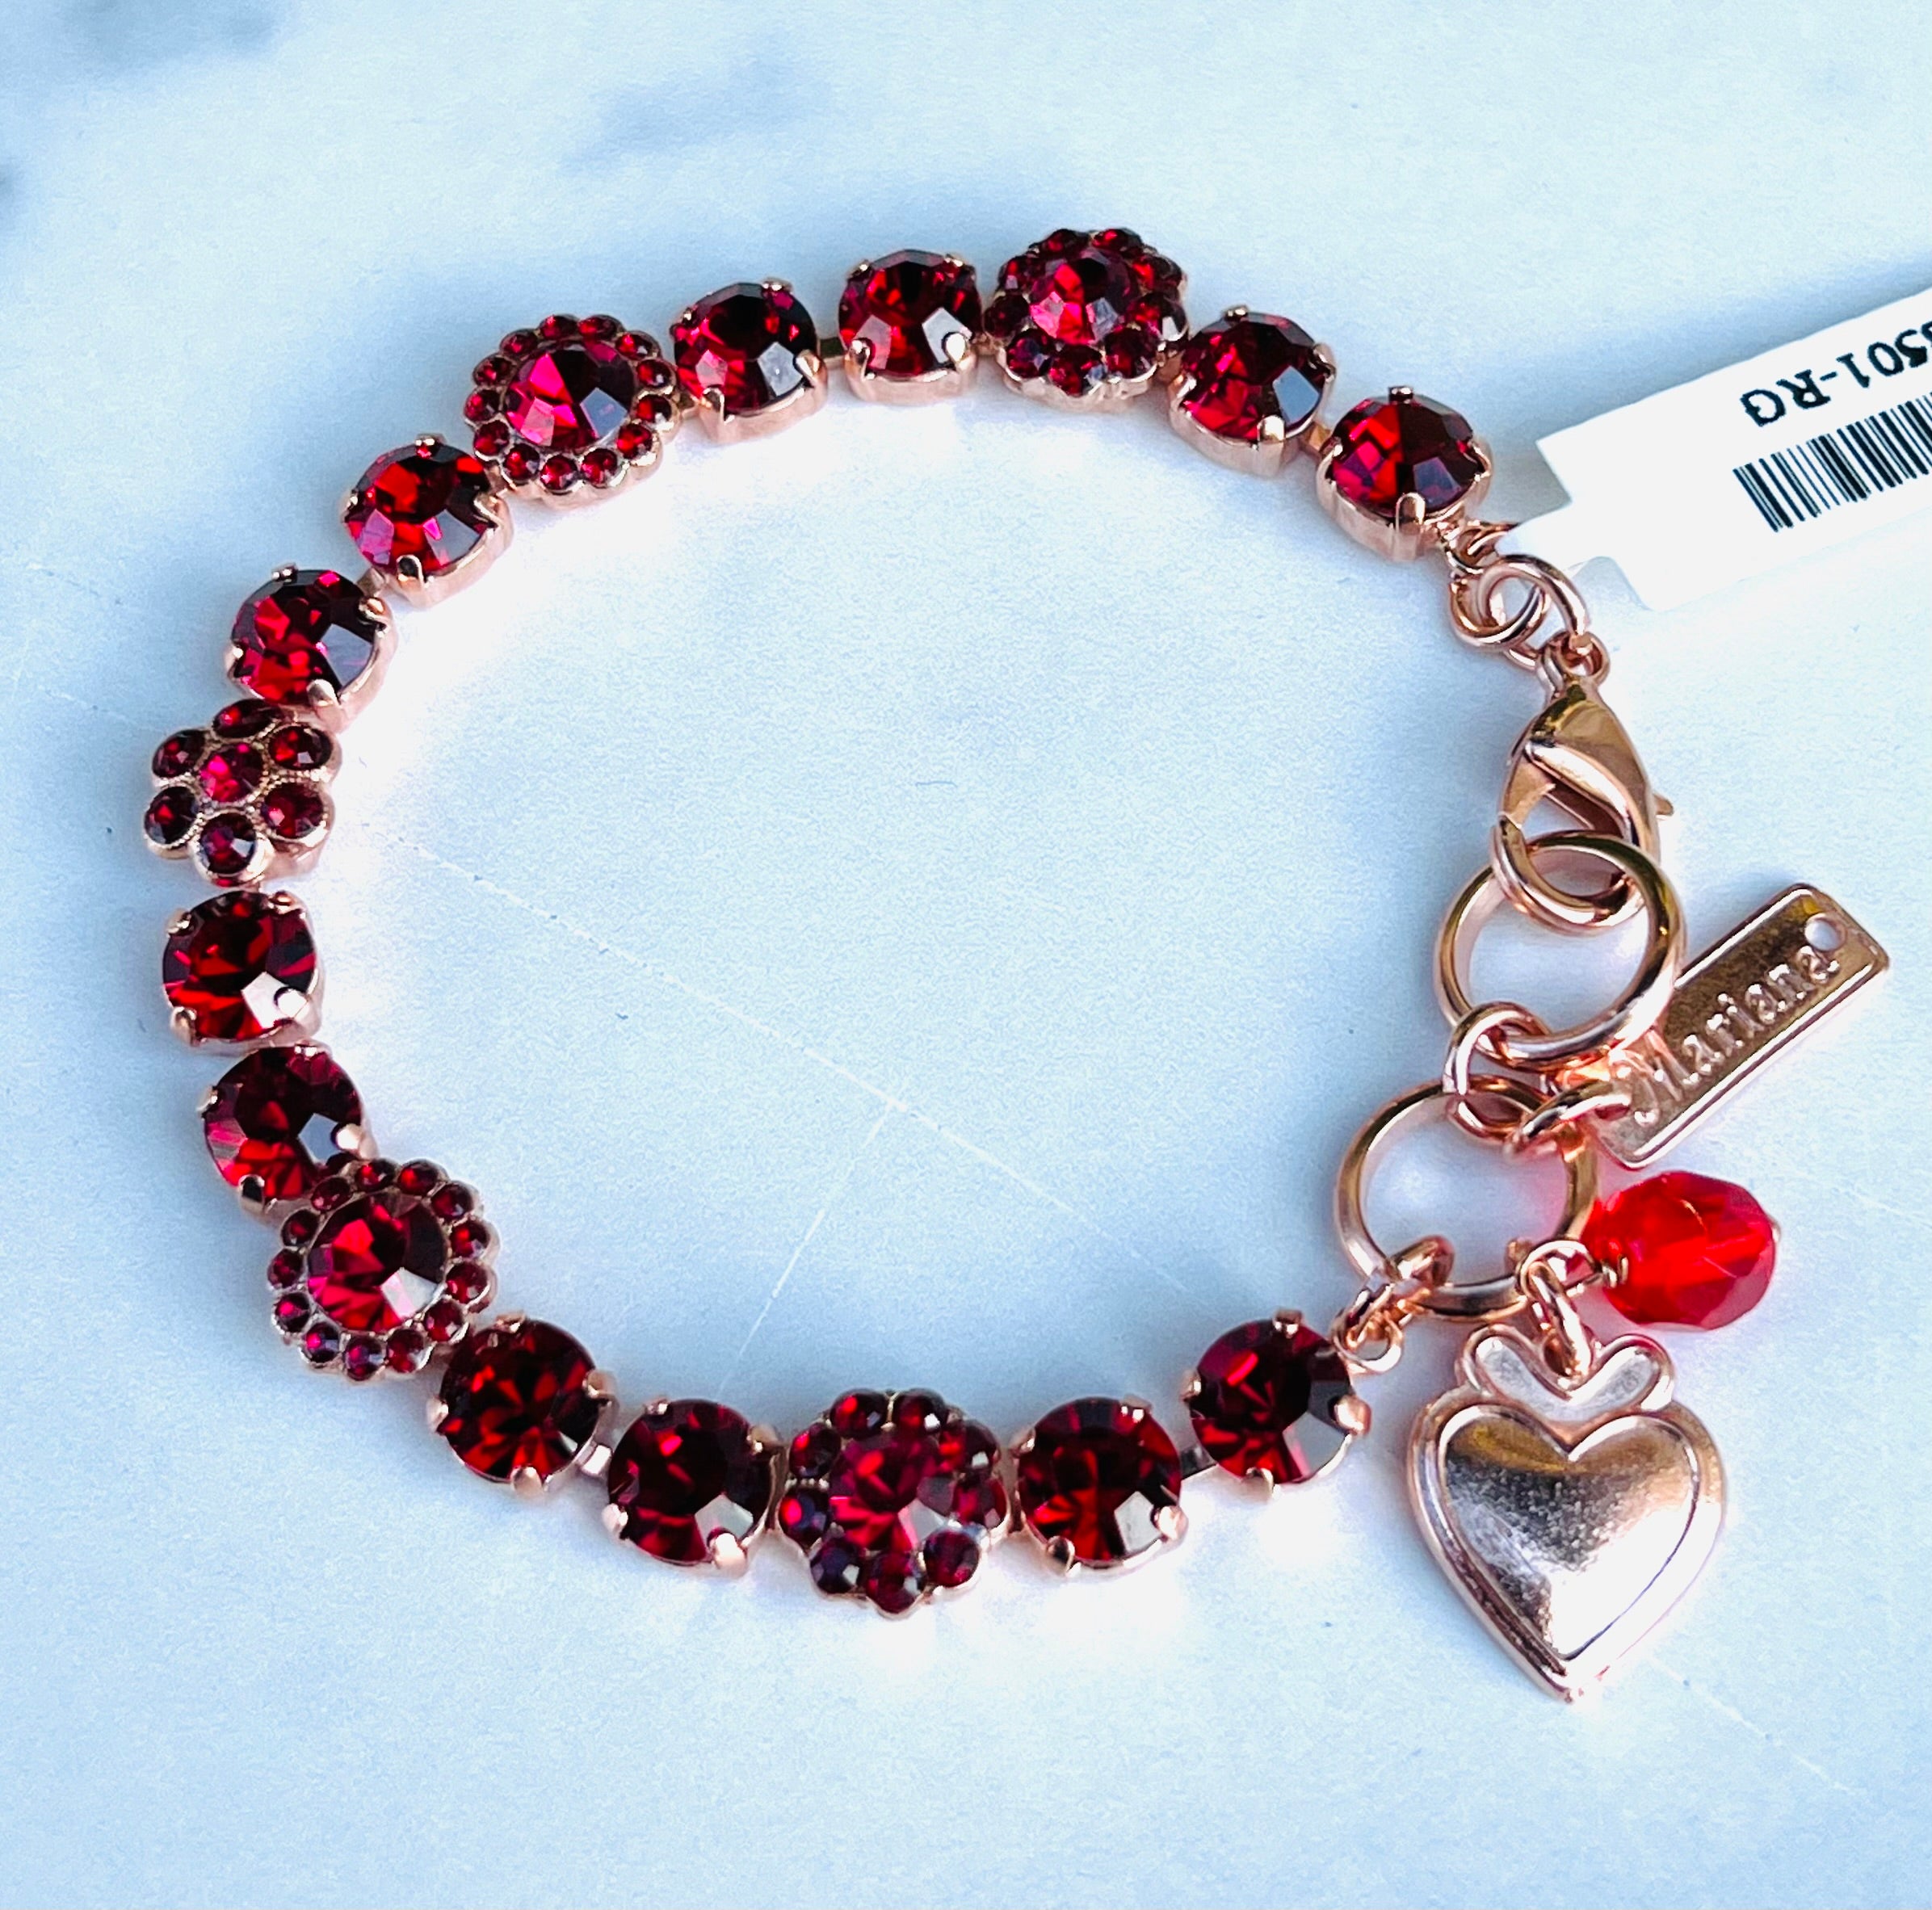 SWAROVSKI POWER COLLECTION DOUBLE WRAP BRACELET, BRIGHT RED SWAROVSKI  CRYSTALS ON SOFT RED ALCANTARA FABRIC - JEWELLERY from Adams Jewellers  Limited UK